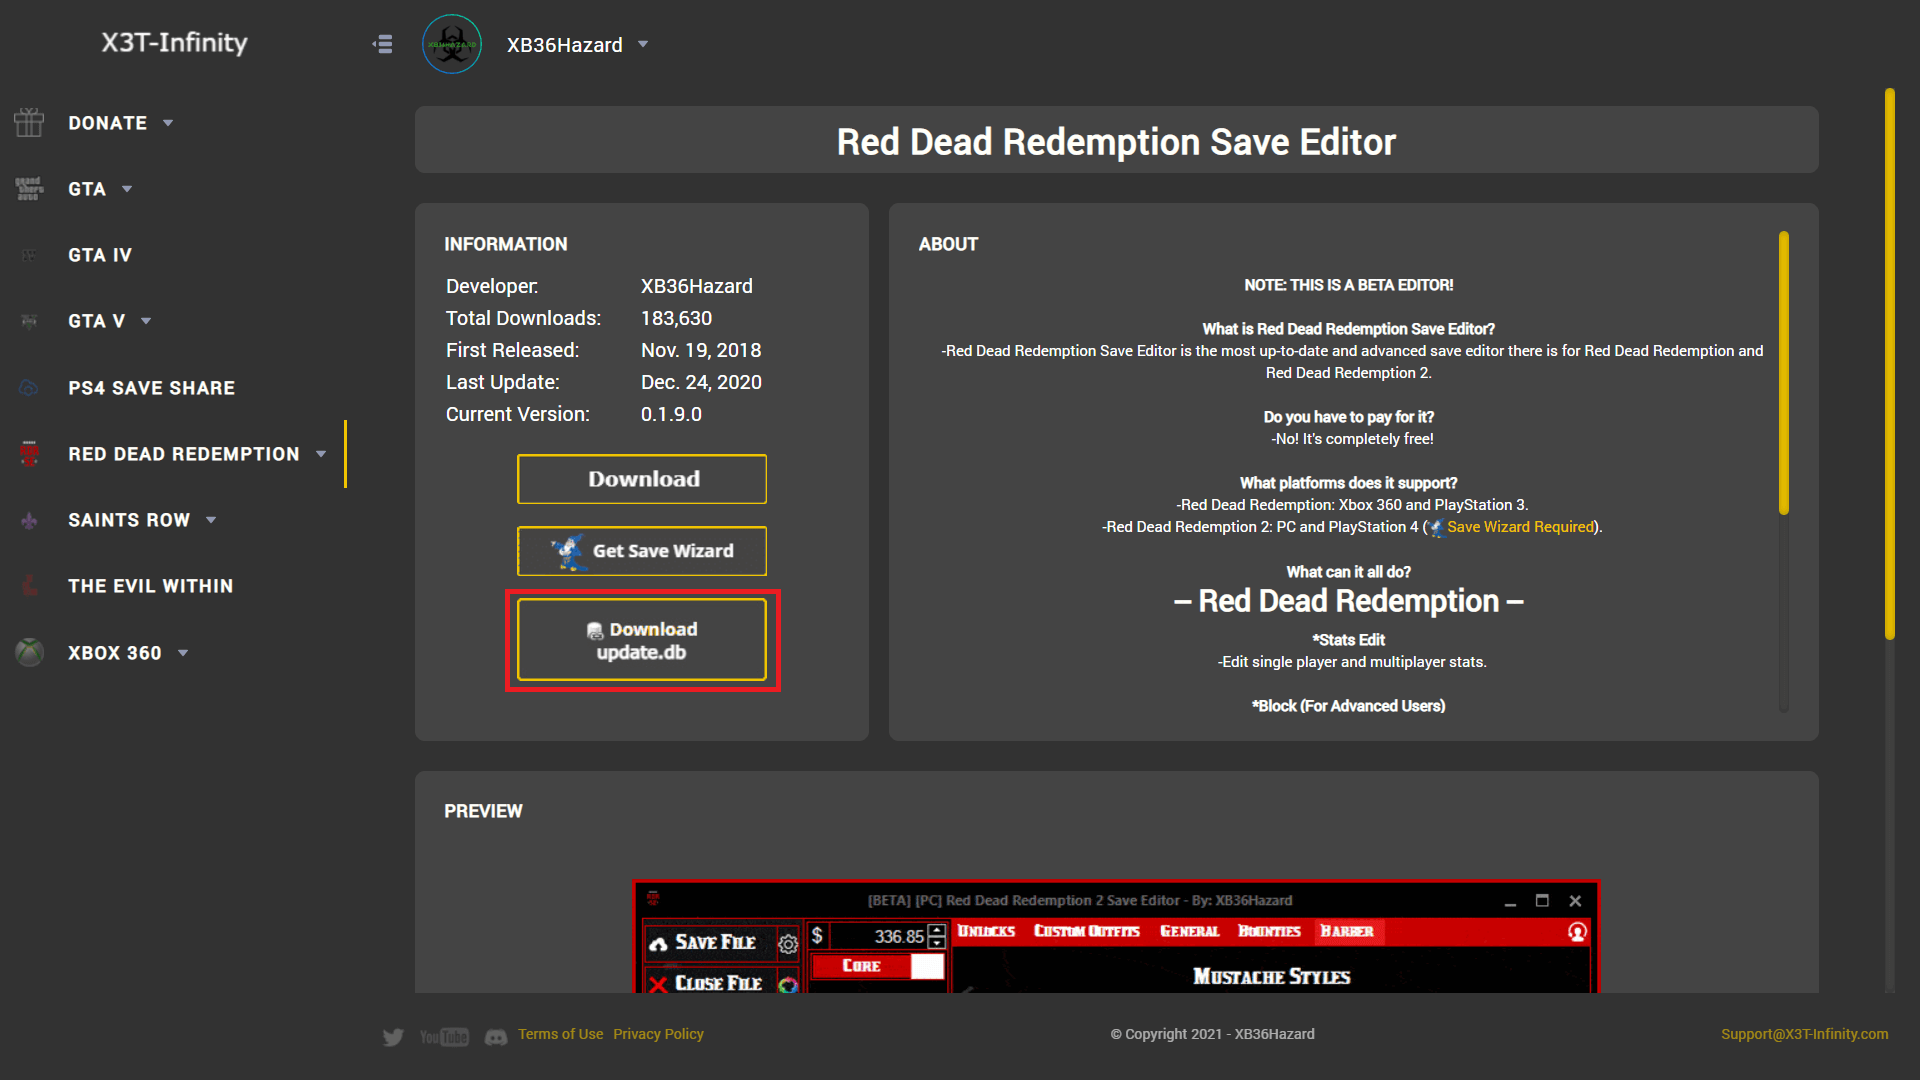 Array af landing Ubarmhjertig XB36Hazard on Twitter: "Anyone having an issue with Red Dead Redemption  Save Editor not loading the database. Please download the "update.db" from  https://t.co/r6C6Ie5vpl and put the "update.db" in the following folder:  %localappdata%\RDRSE